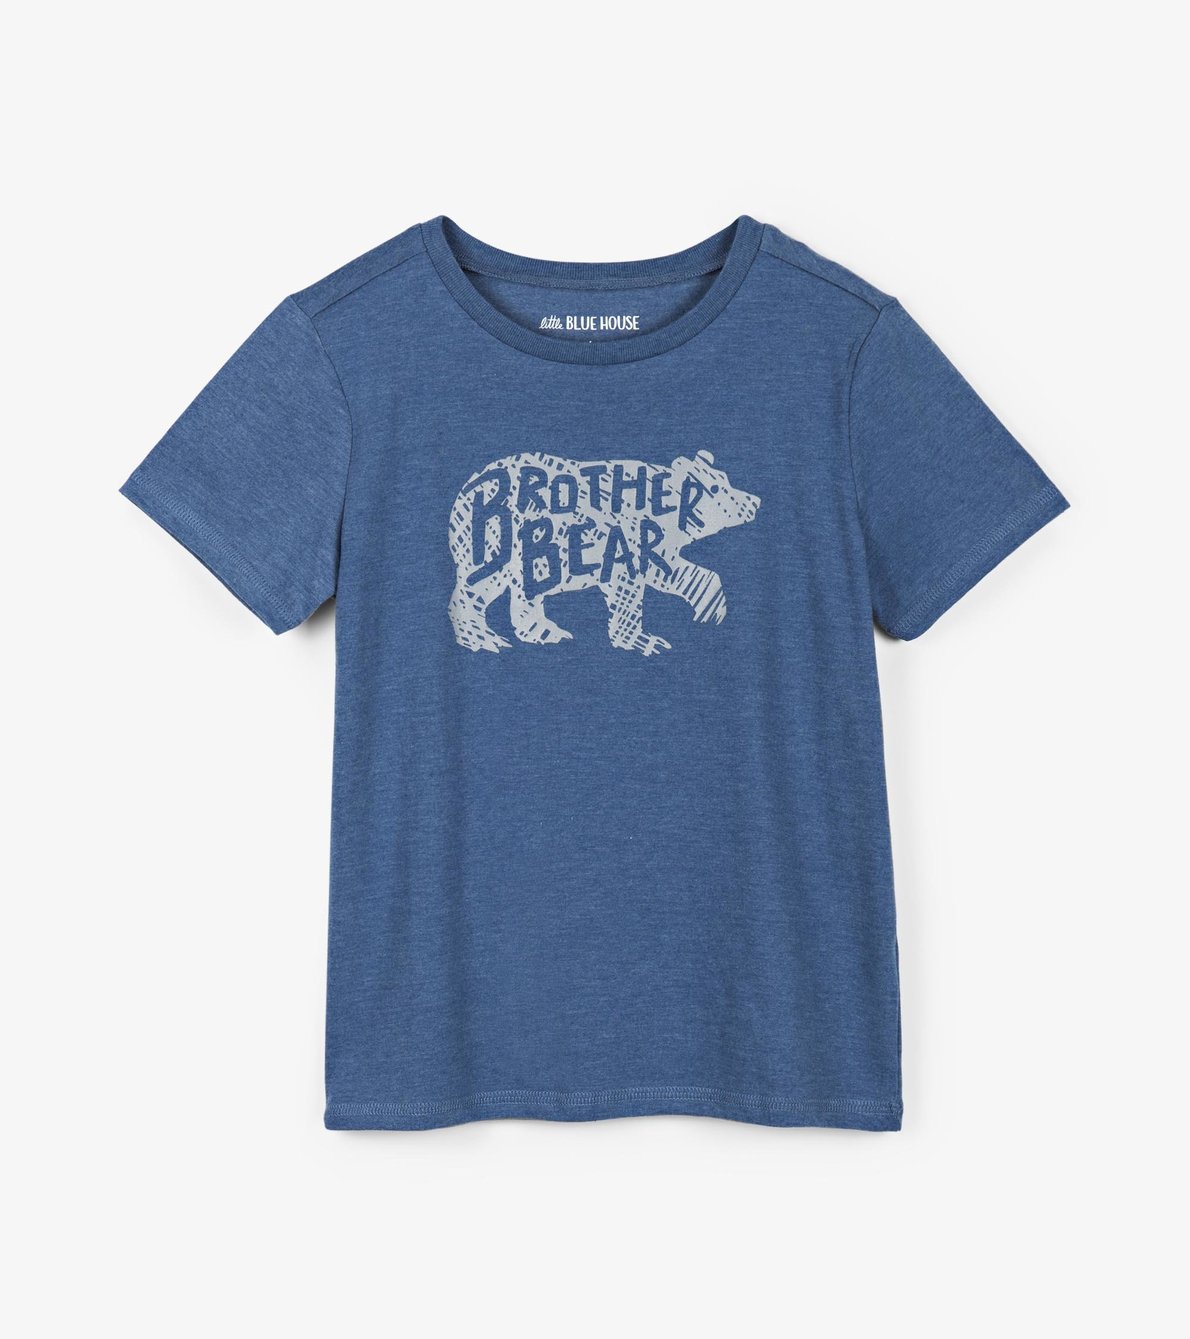 View larger image of Brother Bear Kids Crew Neck Tee